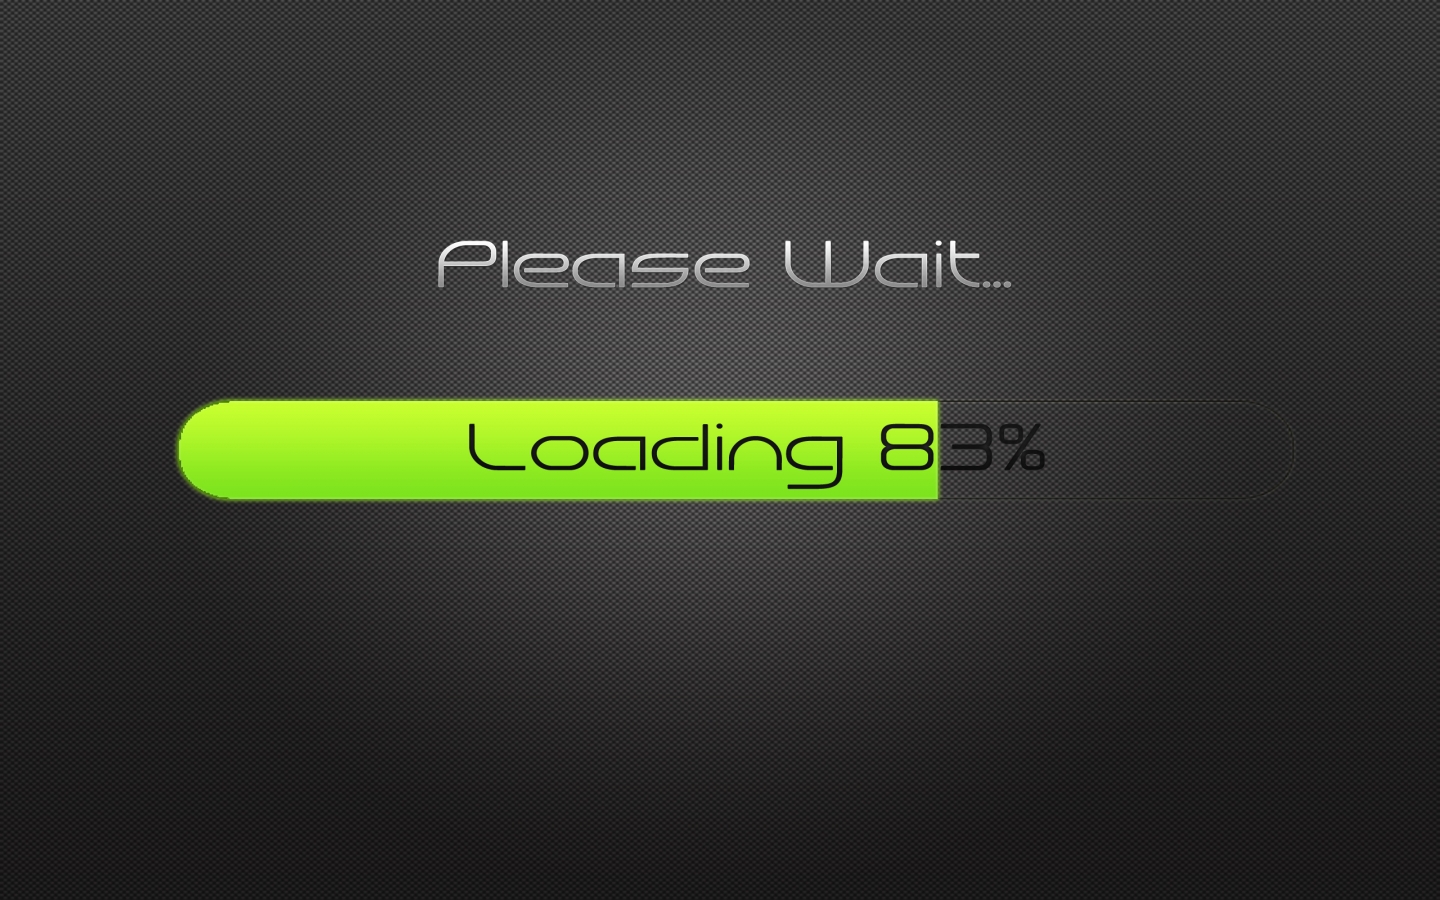 Loading for 1440 x 900 widescreen resolution